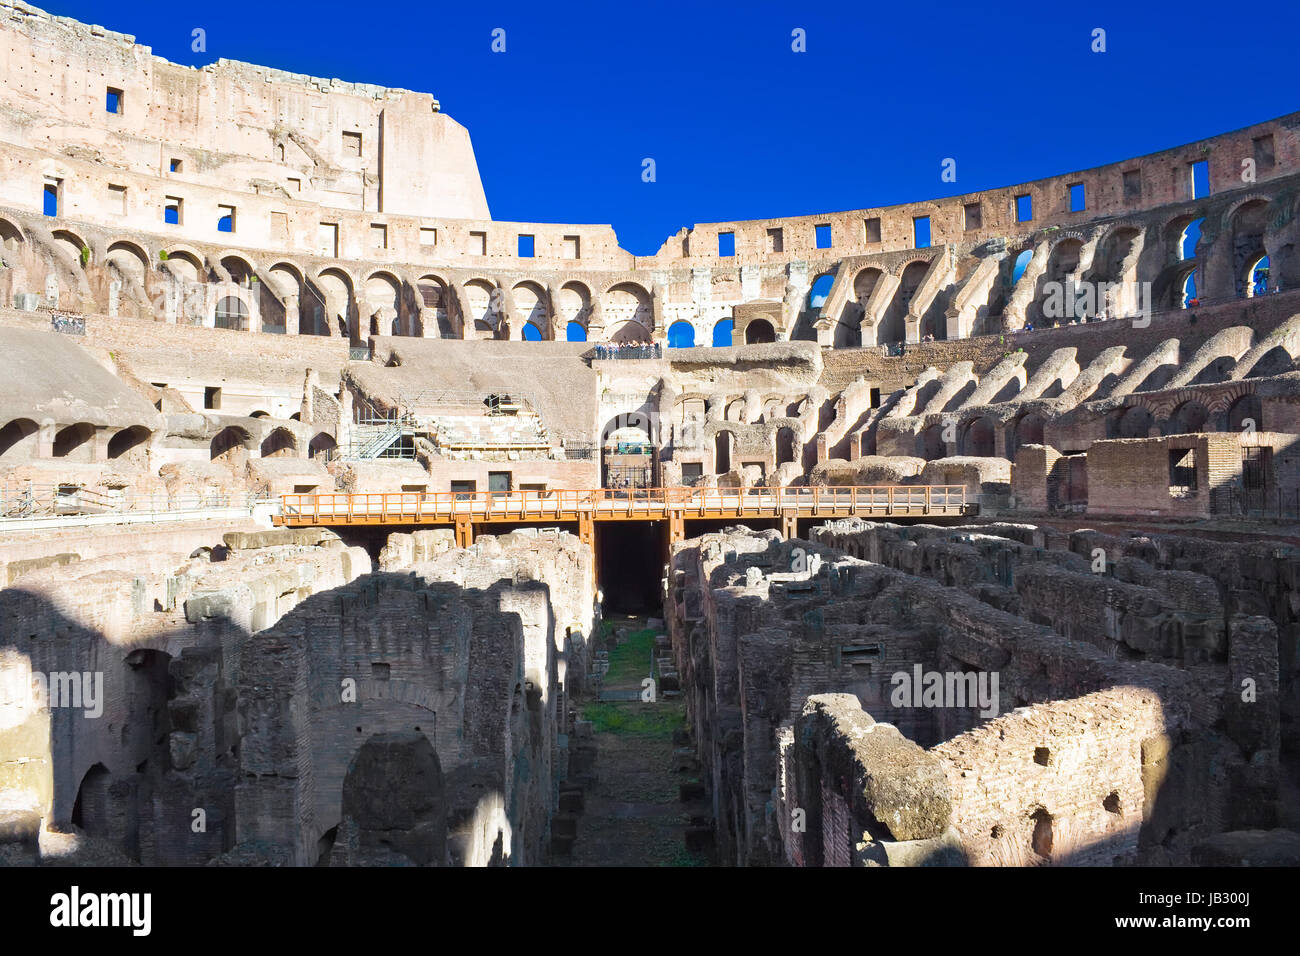 Ruins of famous roman amphitheater Colosseum in Rome, Italy Stock Photo